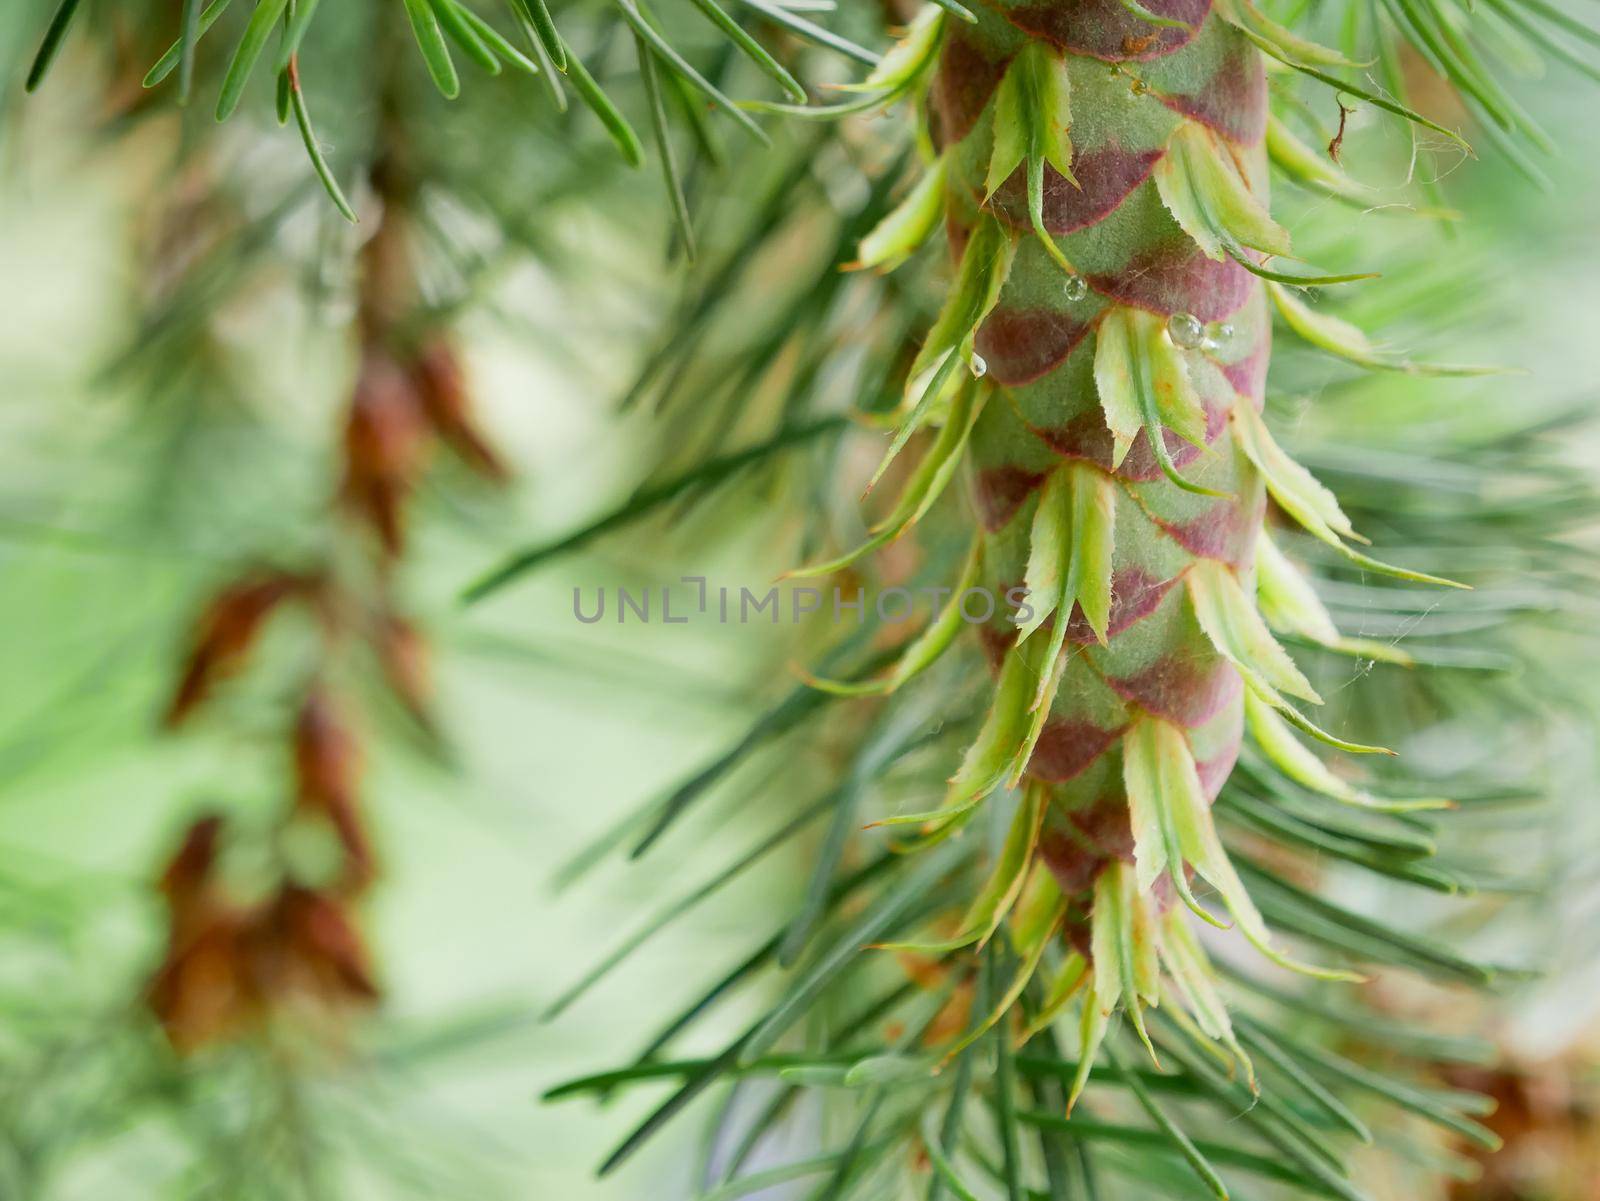 Two fresh healthy green pine tree cone, view from below